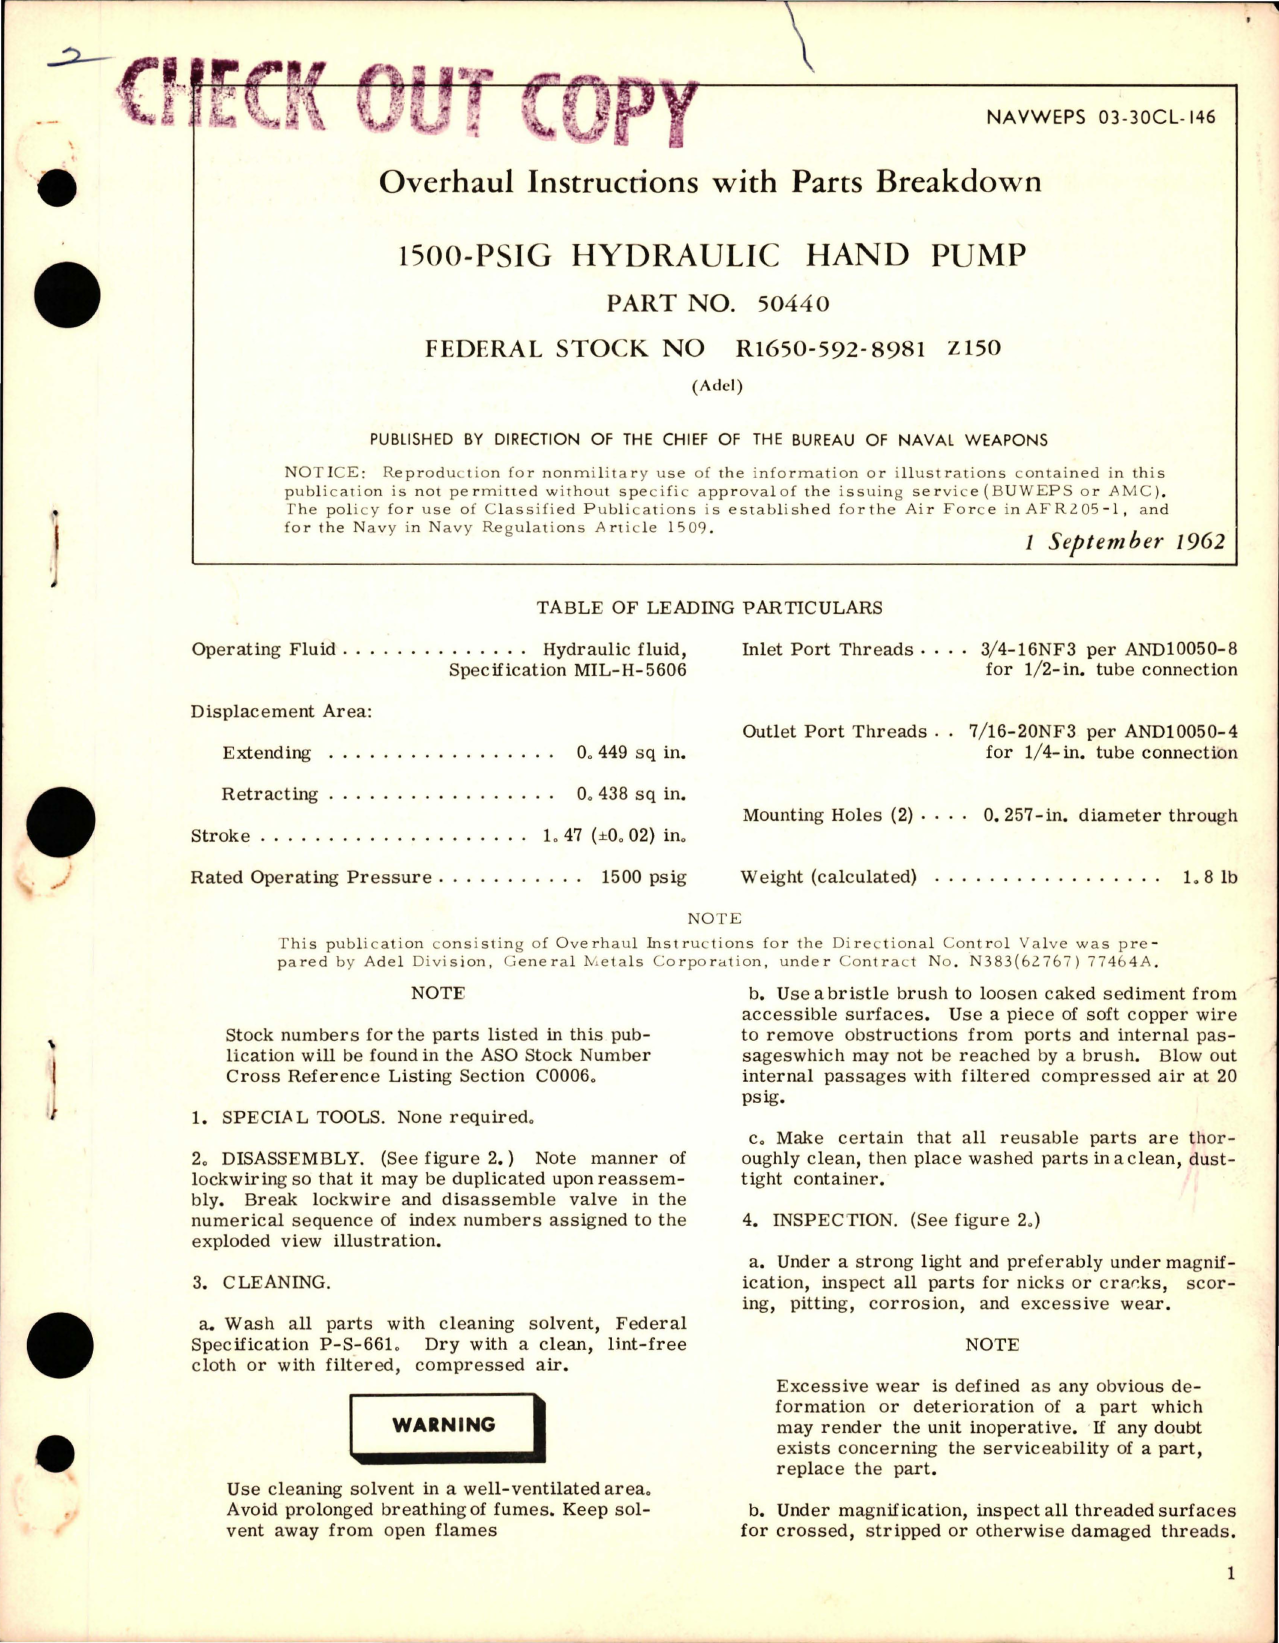 Sample page 1 from AirCorps Library document: Overhaul Instructions with Parts Breakdown for Hydraulic Hand Pump - 1500 PSIG - Part 50440 